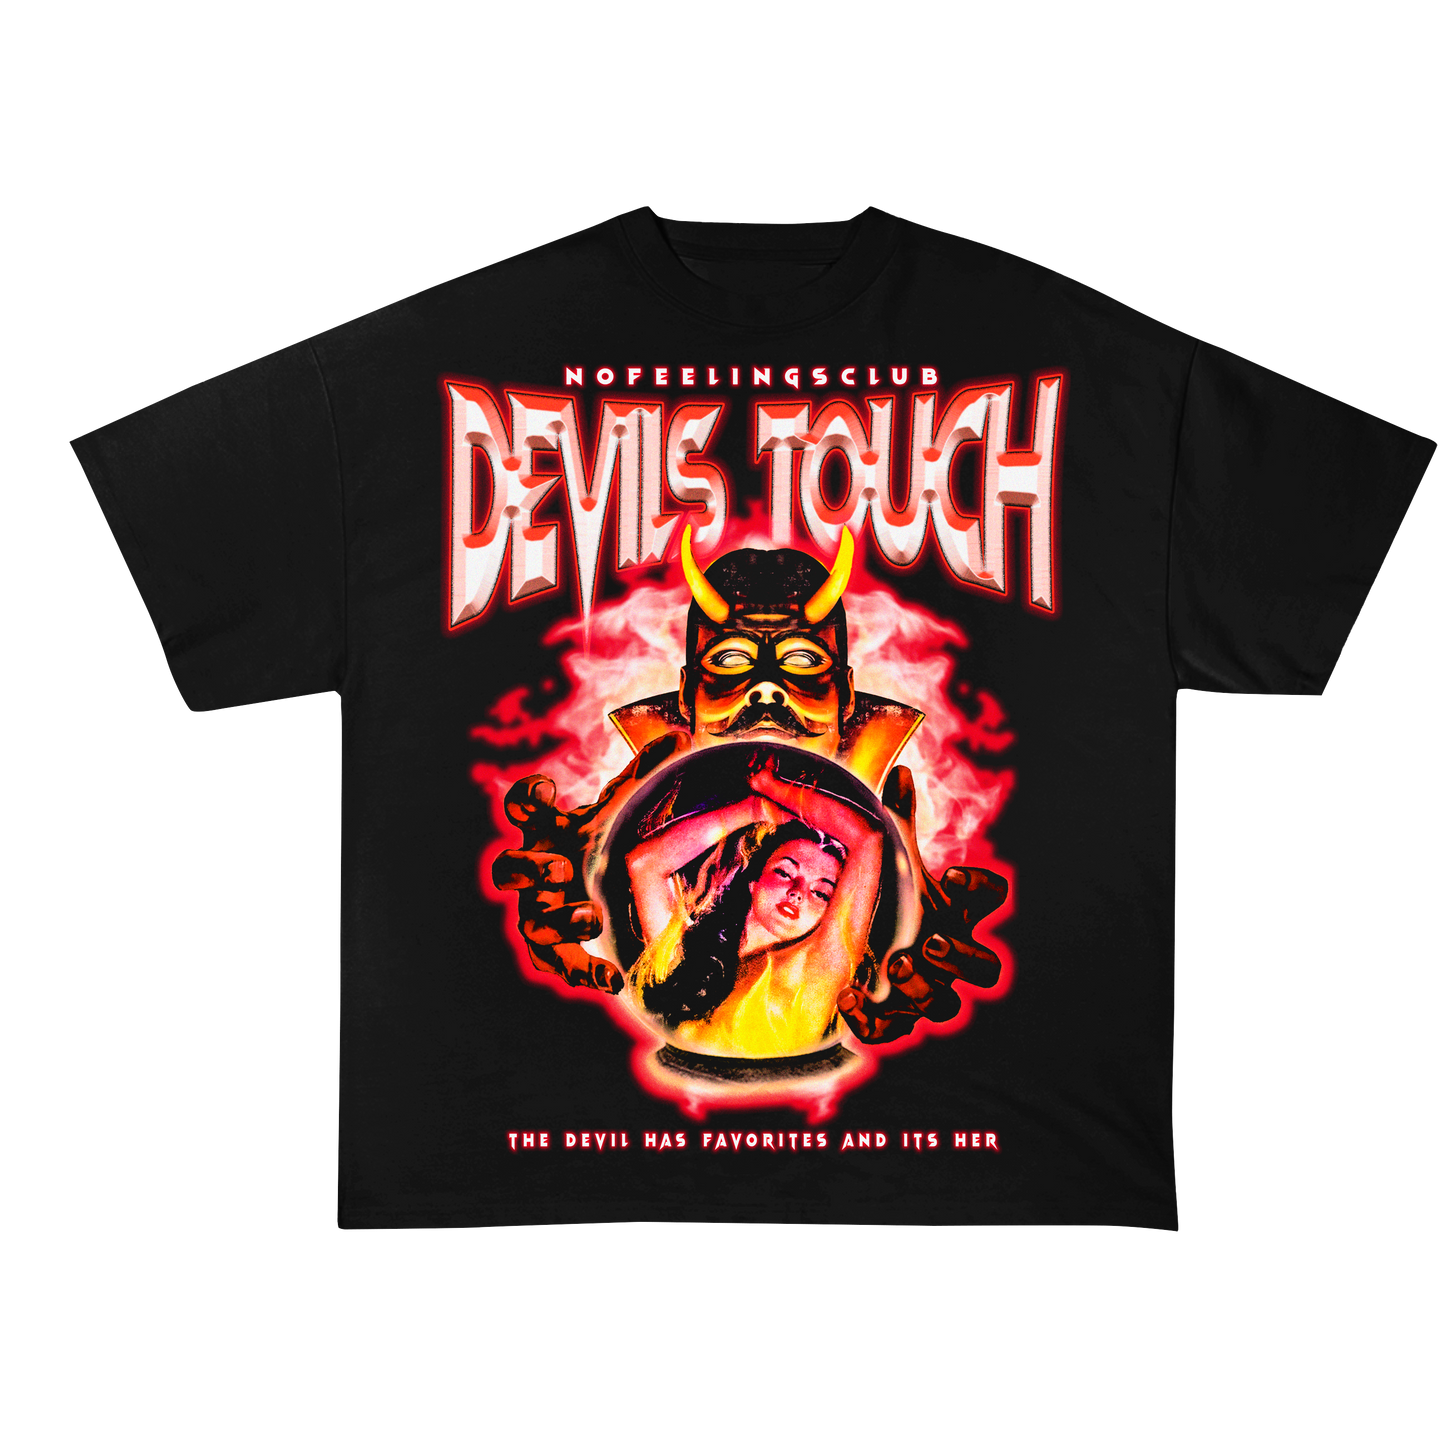 DEVILS TOUCH